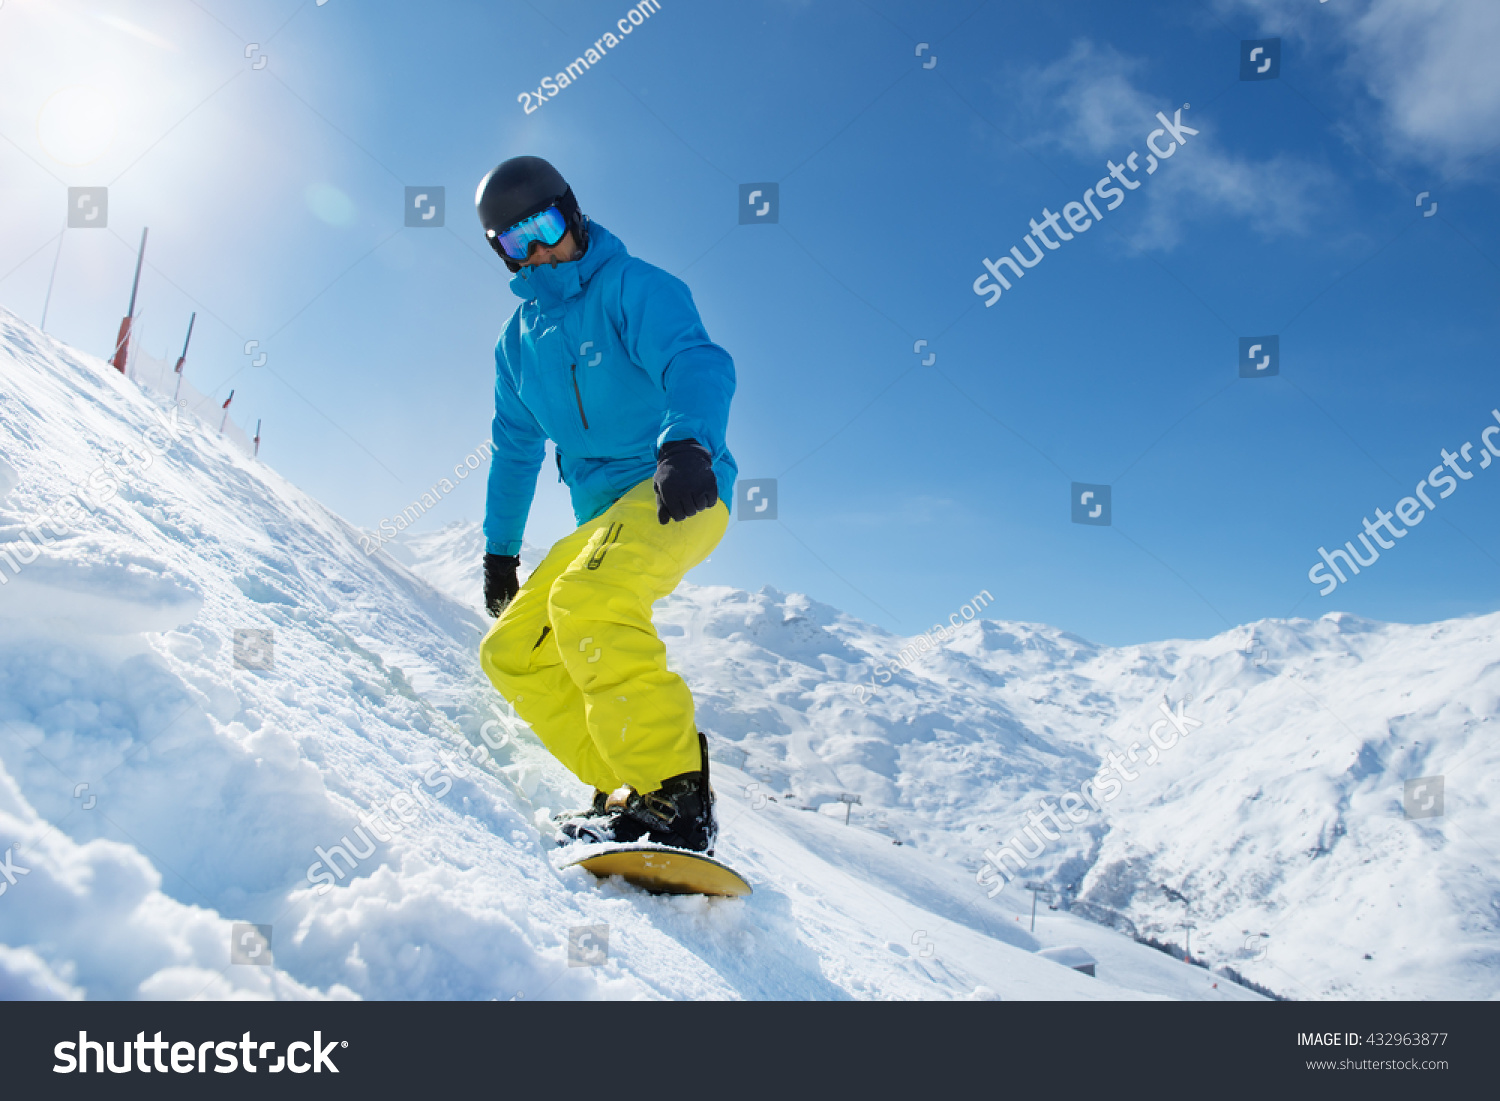 Recreation vacation at a ski resort - snowboarder enjoying snow in the mountains #432963877